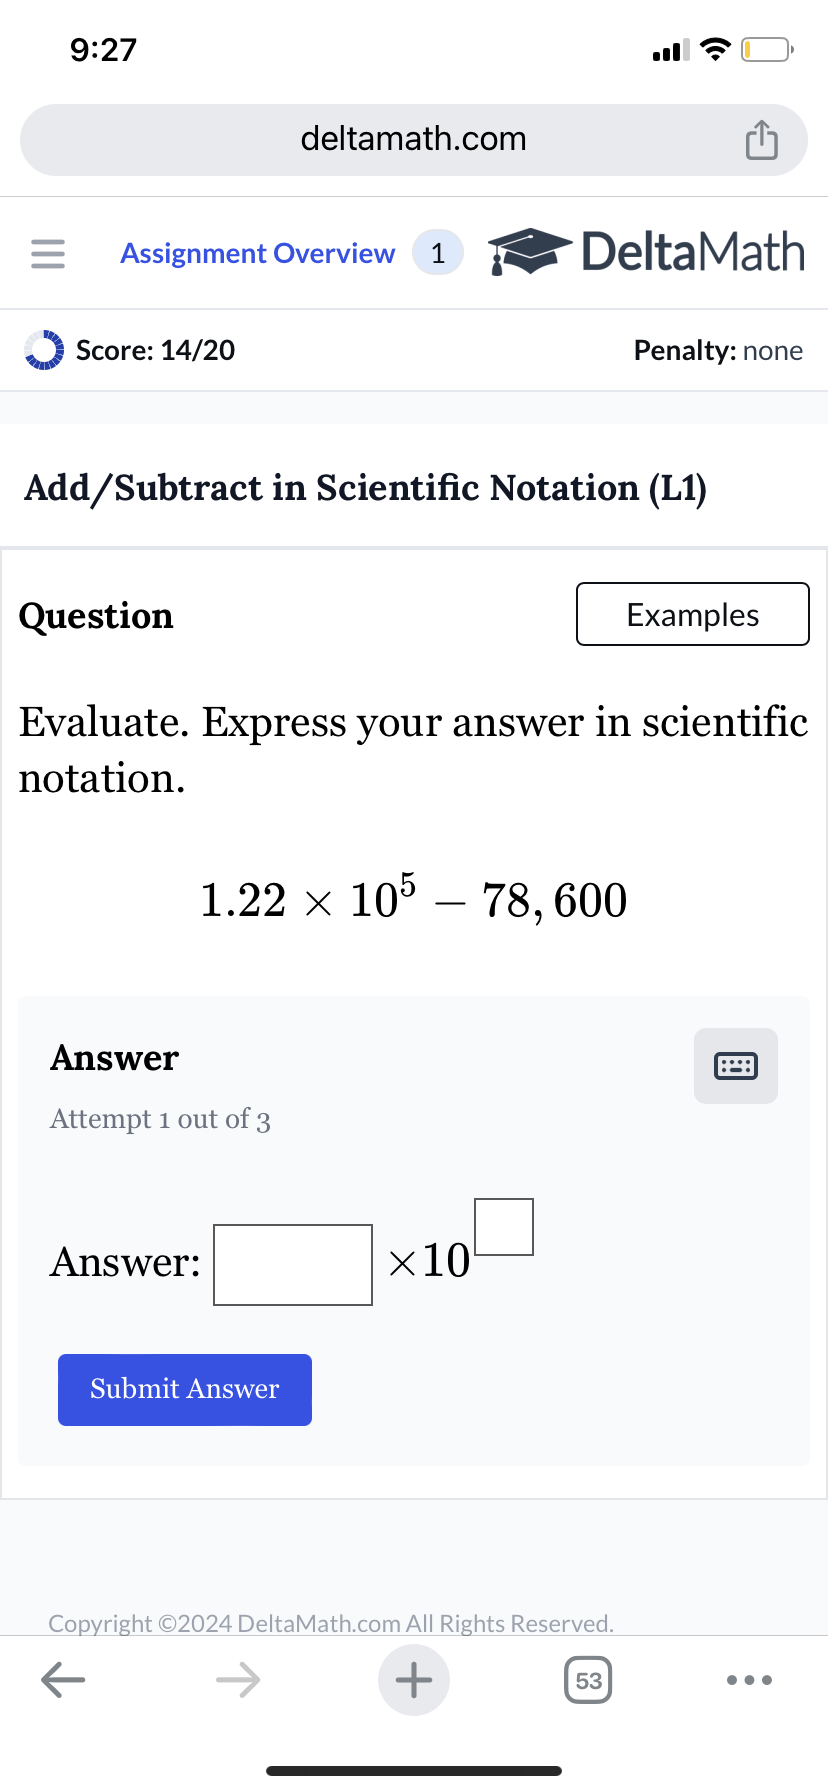 9:27
deltamath.com
= Assignment Overview 1
DeltaMath
Score: 14/20
Penalty: none
Add/Subtract in Scientific Notation (L1)
Question
Examples
Evaluate. Express your answer in scientific
notation.
1.22 × 105 - 78,600
Answer
Attempt 1 out of 3
Answer:
Submit Answer
×10
Copyright ©2024 DeltaMath.com All Rights Reserved.
←
+
53